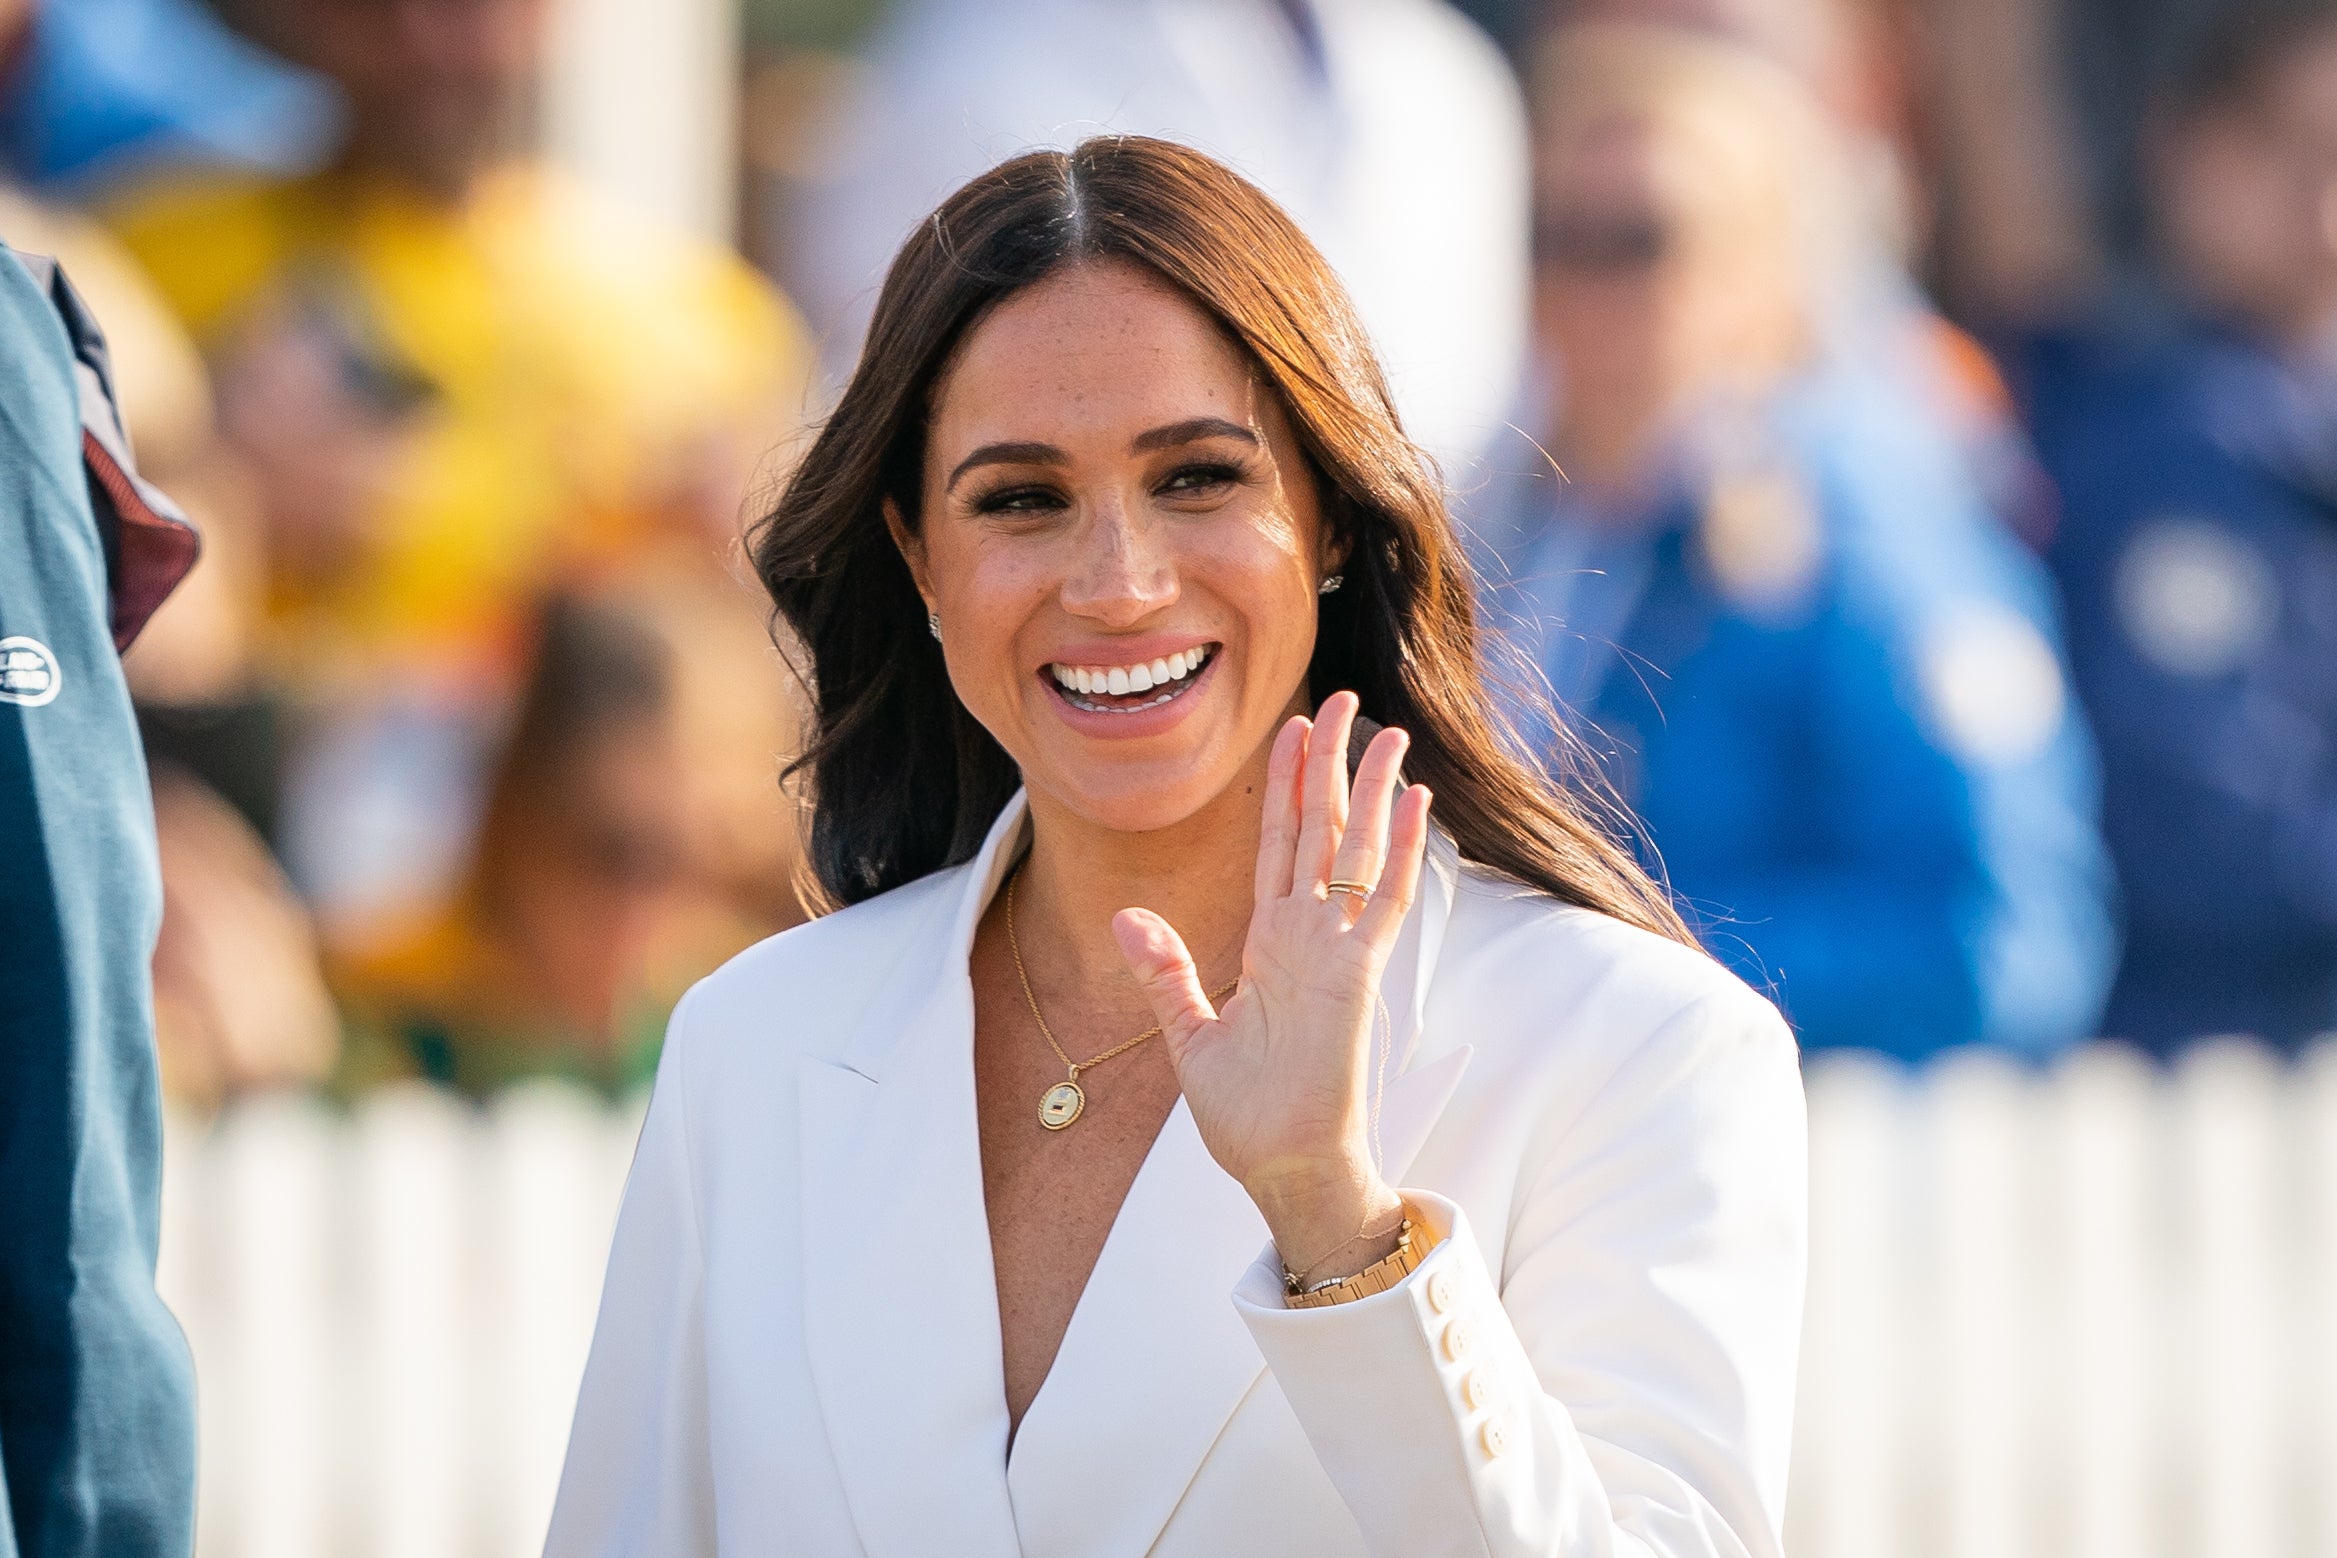 Meghan Markle, the Duchess of Sussex, was also represented by Sherborne